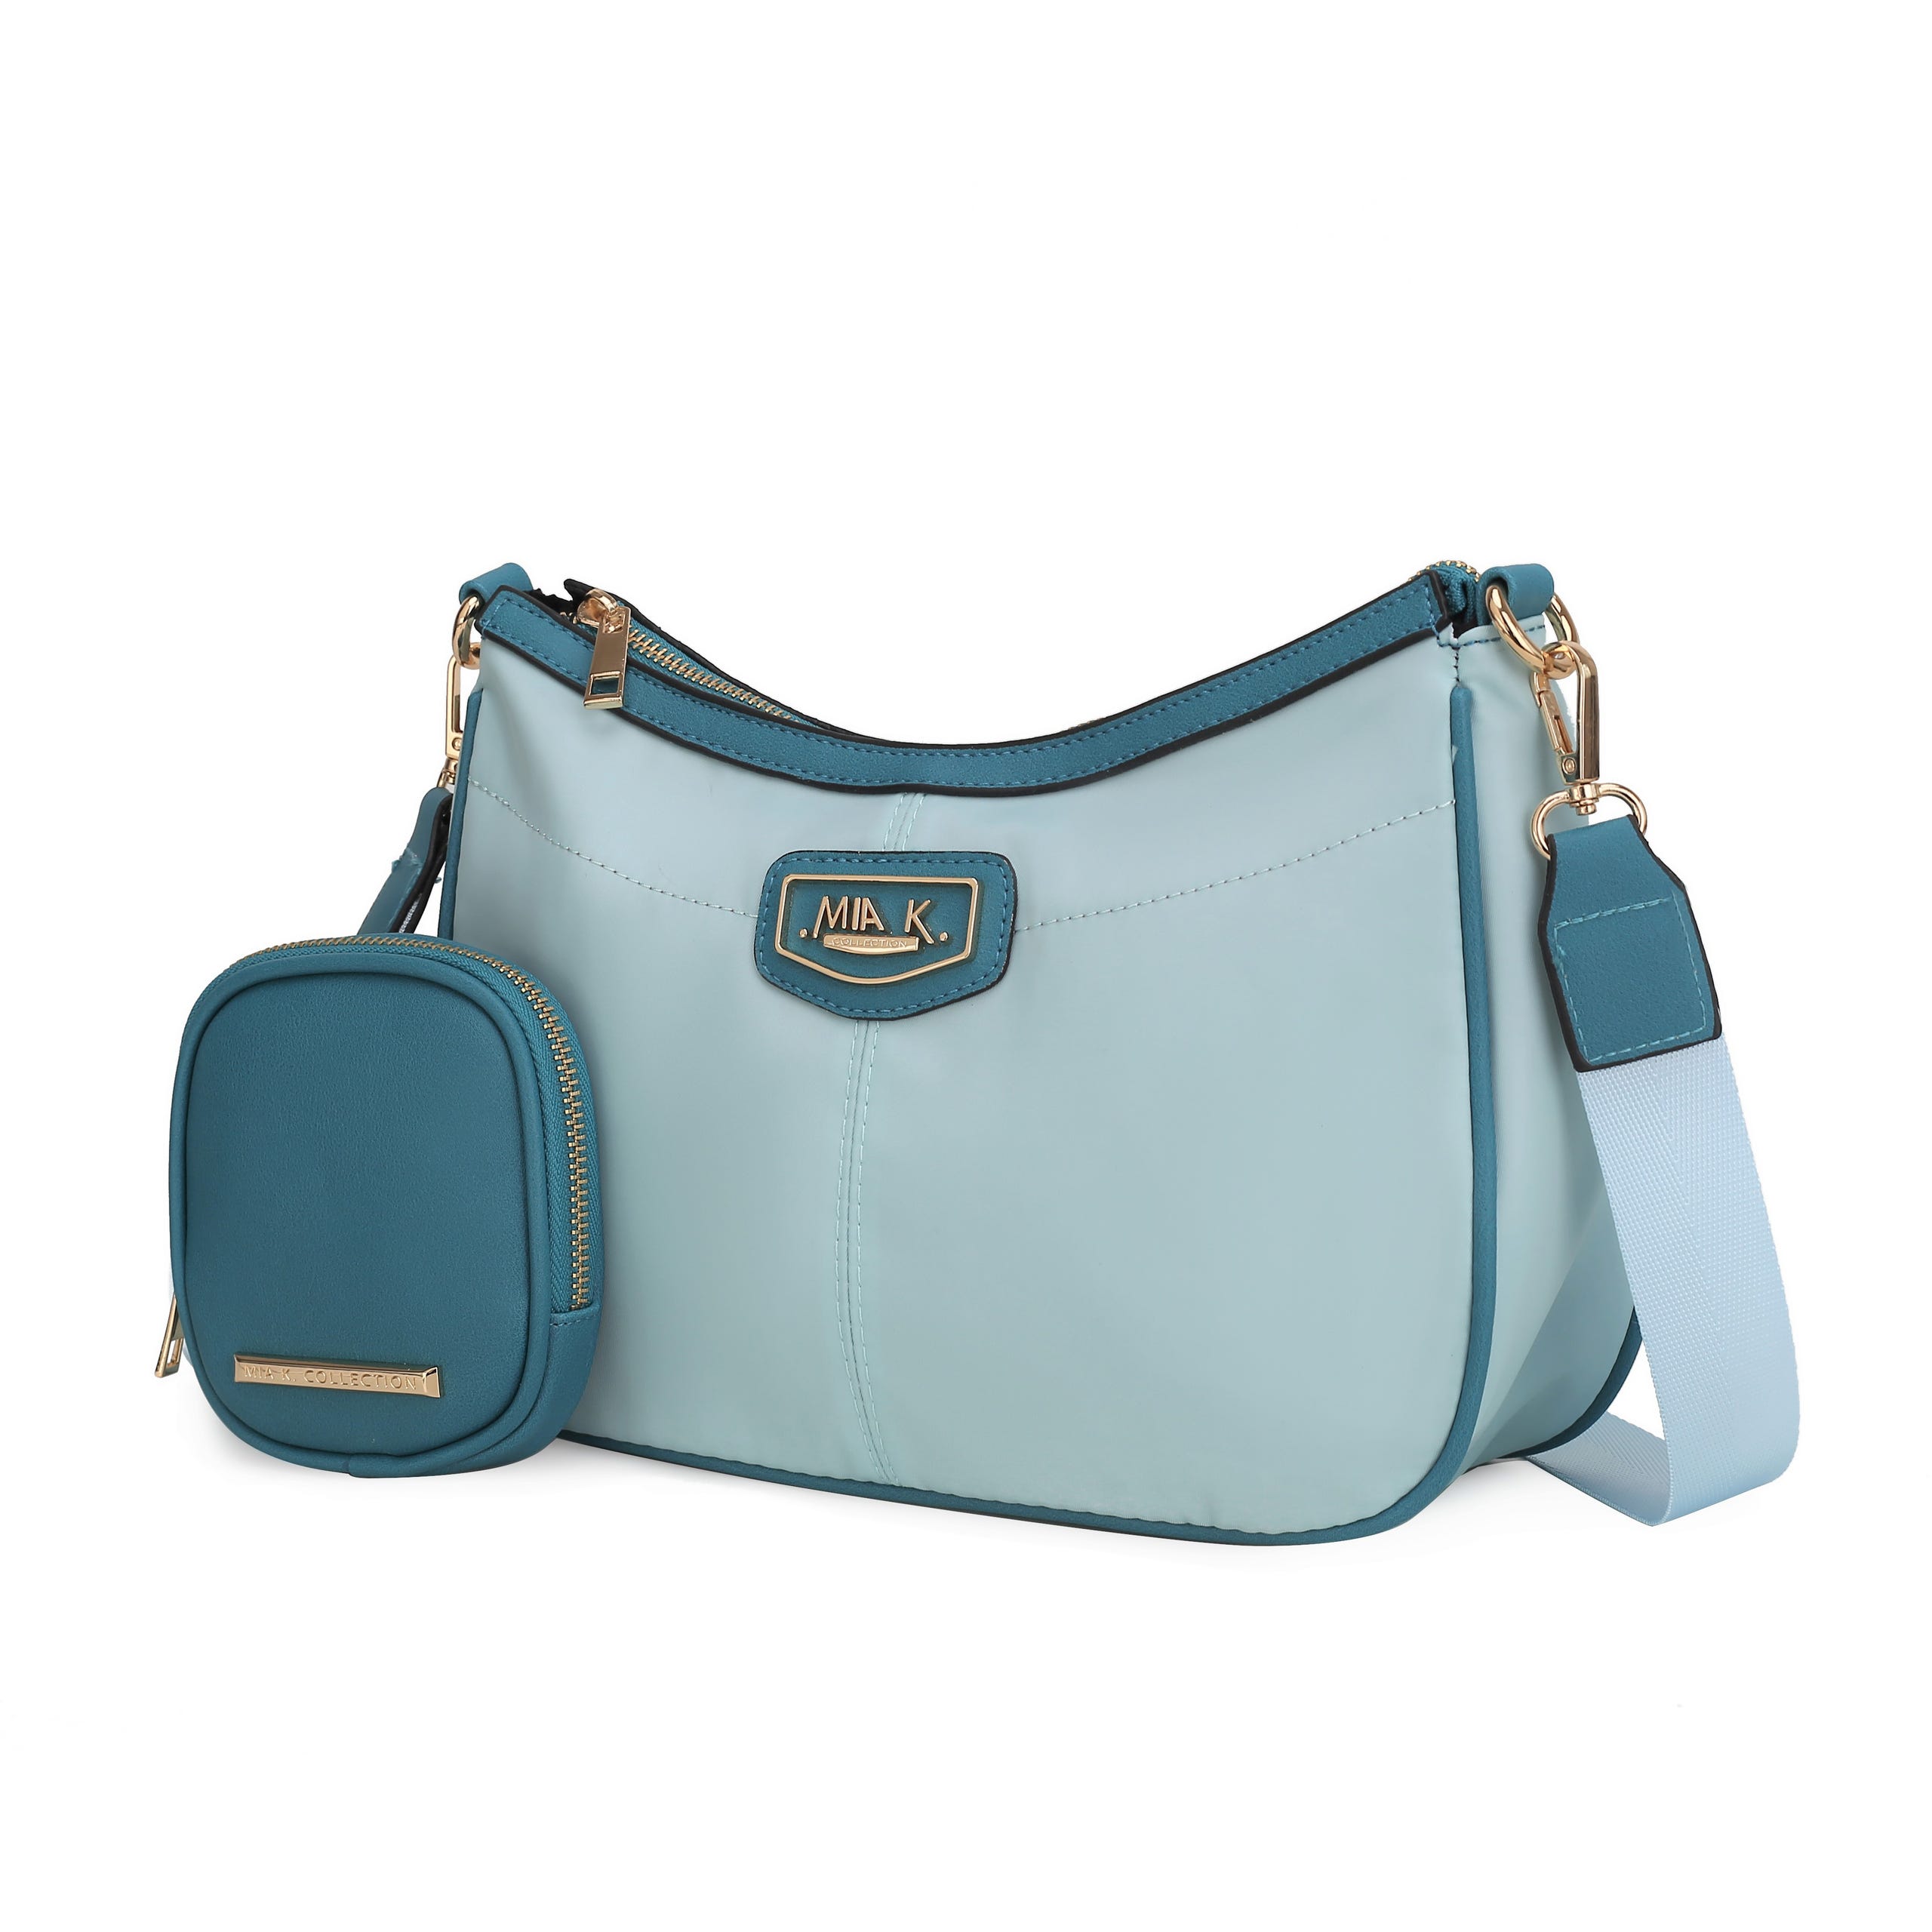 A light blue shoulder bag with a detachable small pouch attached via a strap, both with gold-tone hardware.